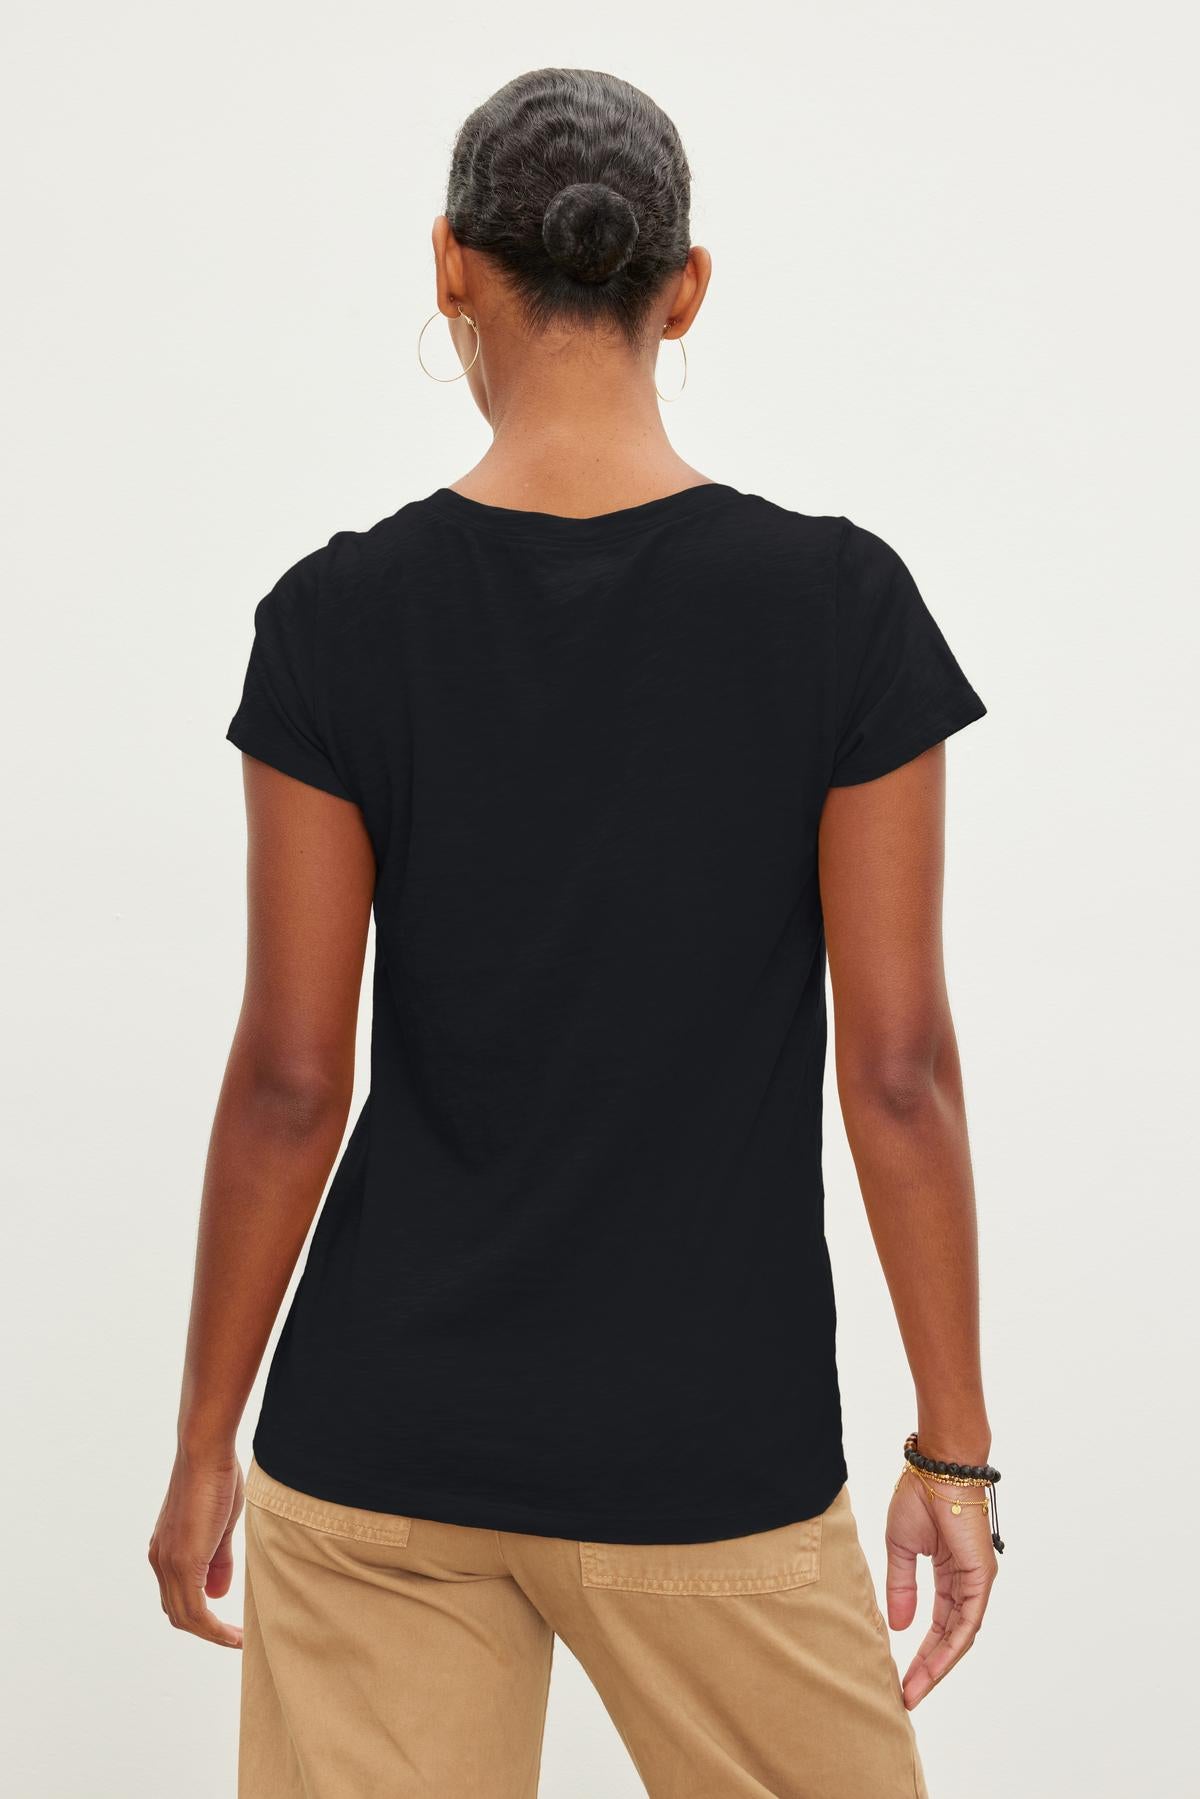   The back view of a woman wearing a JILIAN ORIGINAL SLUB V-NECK TEE, with a relaxed fit, by Velvet by Graham & Spencer. 